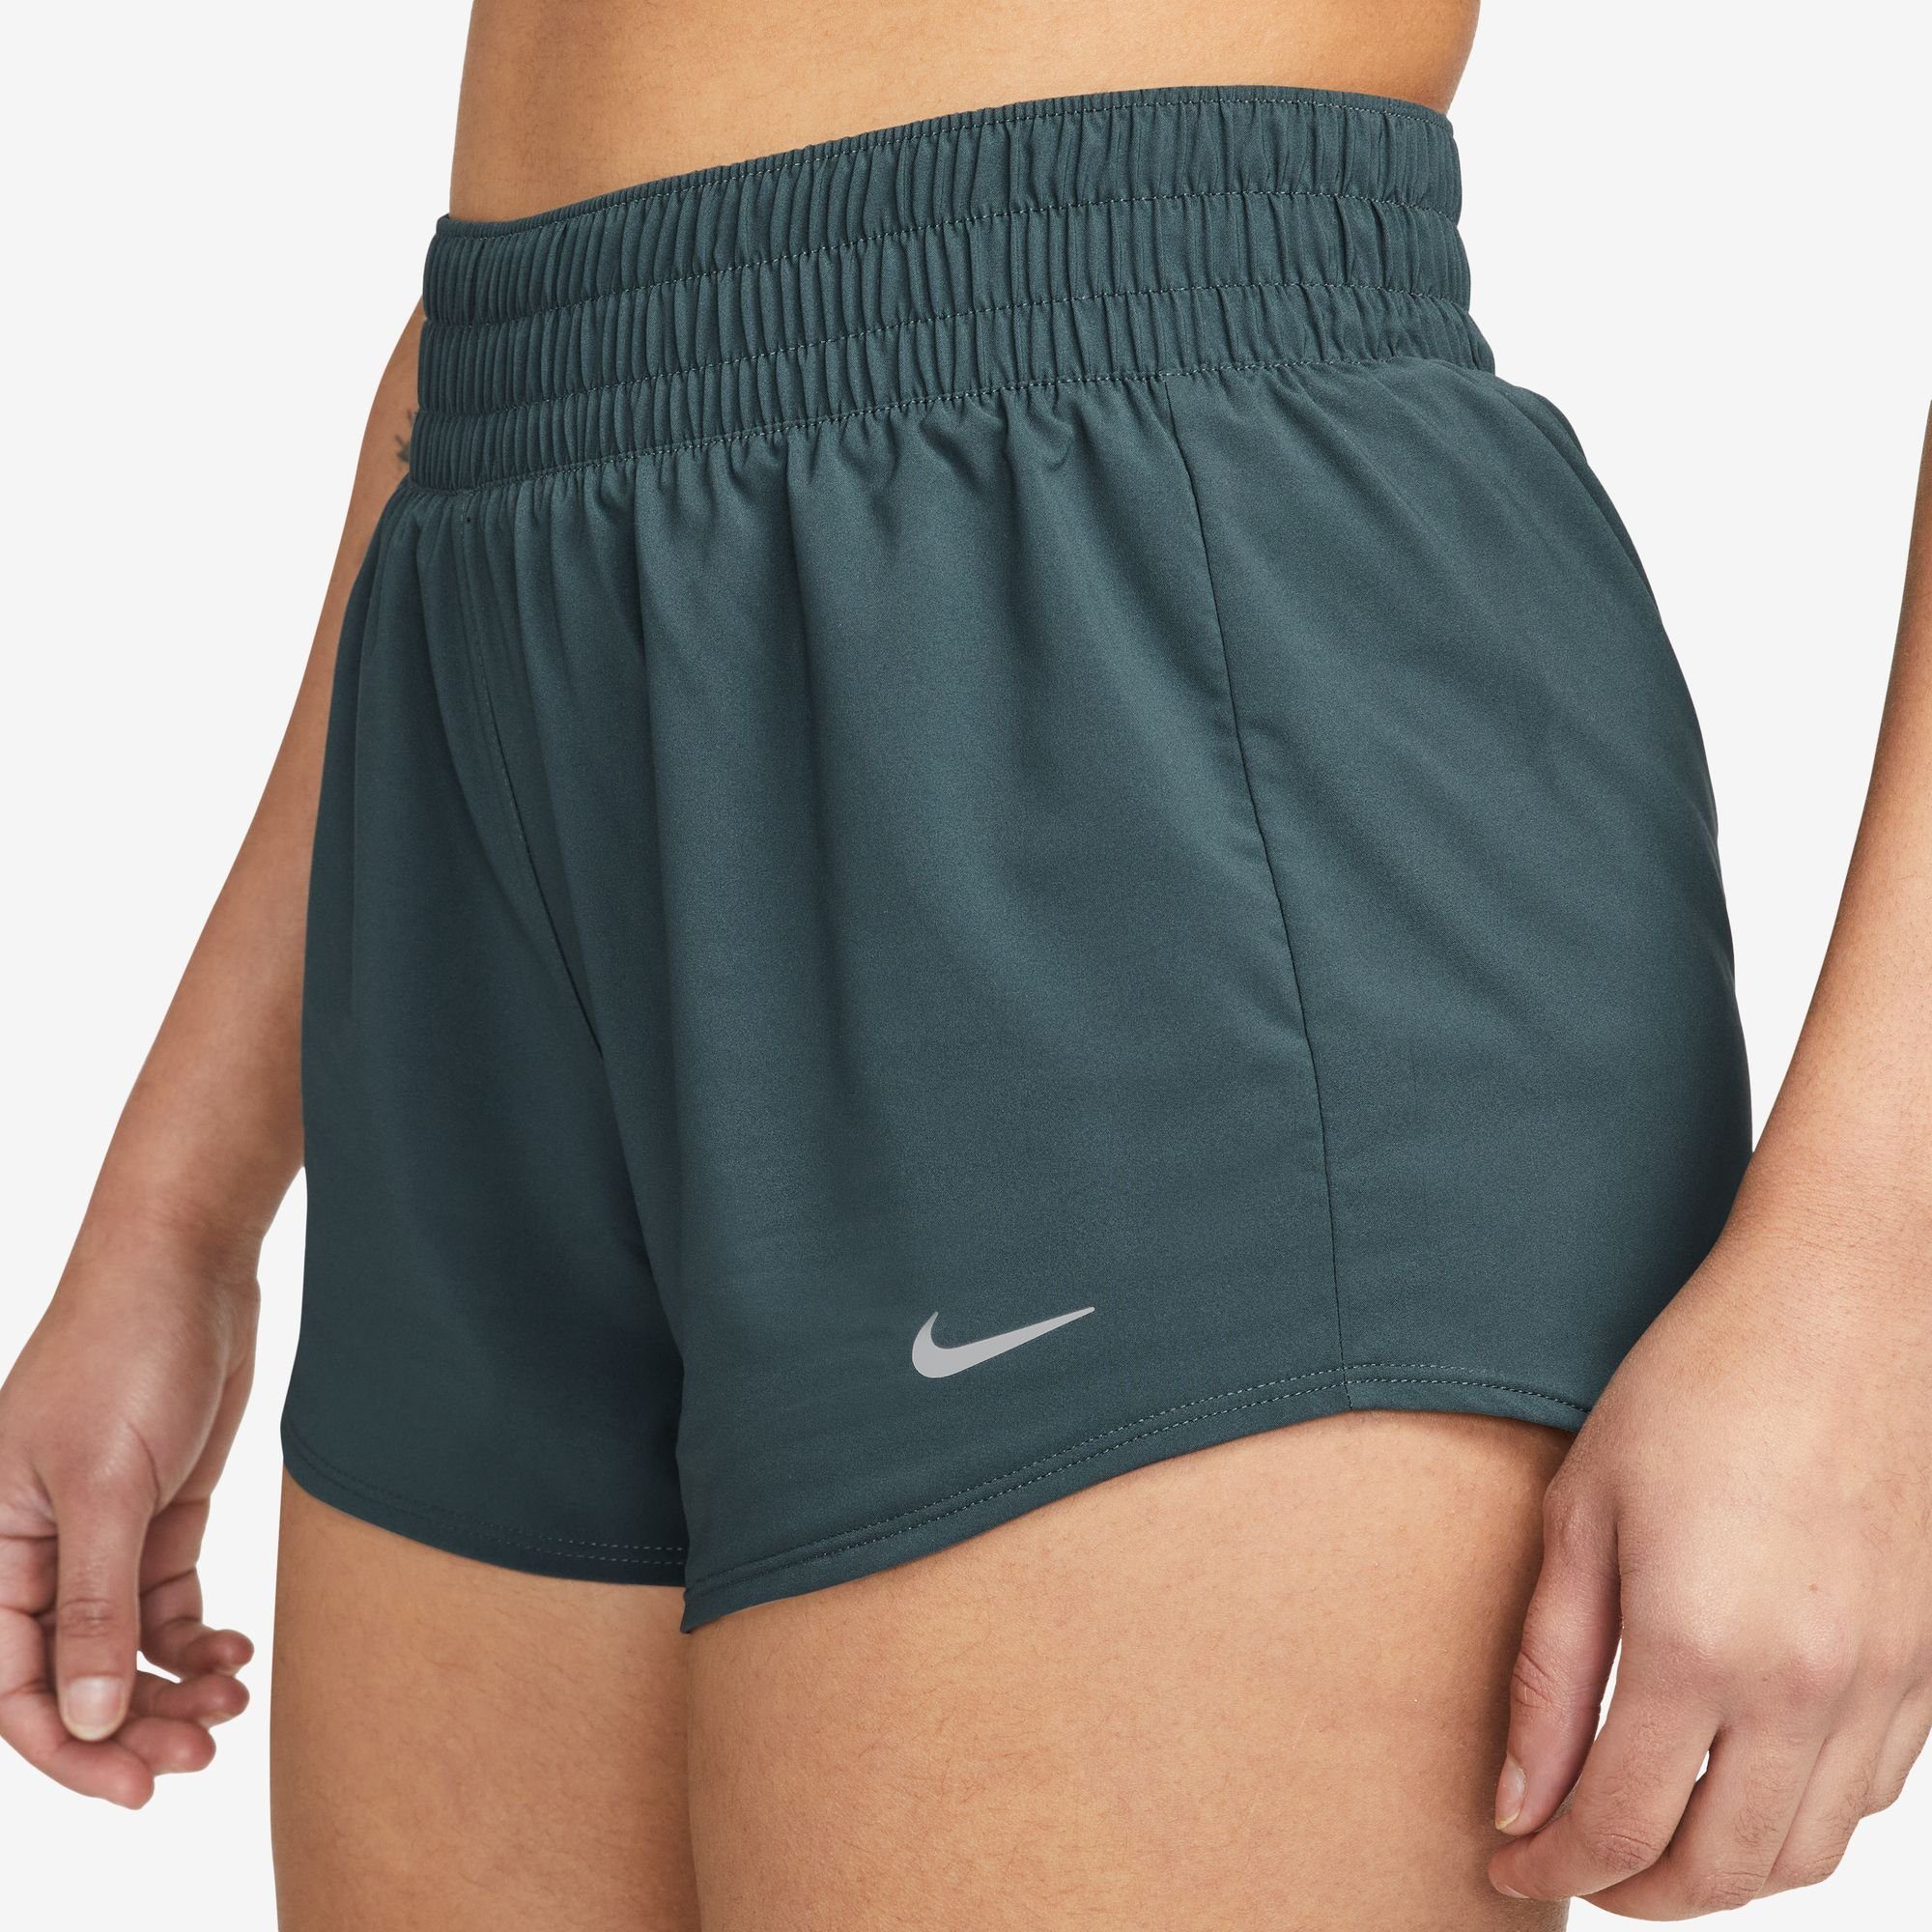 Nike Trainingsshorts DRI-FIT ONE WOMEN'S SILV MID-RISE BRIEF-LINED SHORTS JUNGLE/REFLECTIVE DEEP